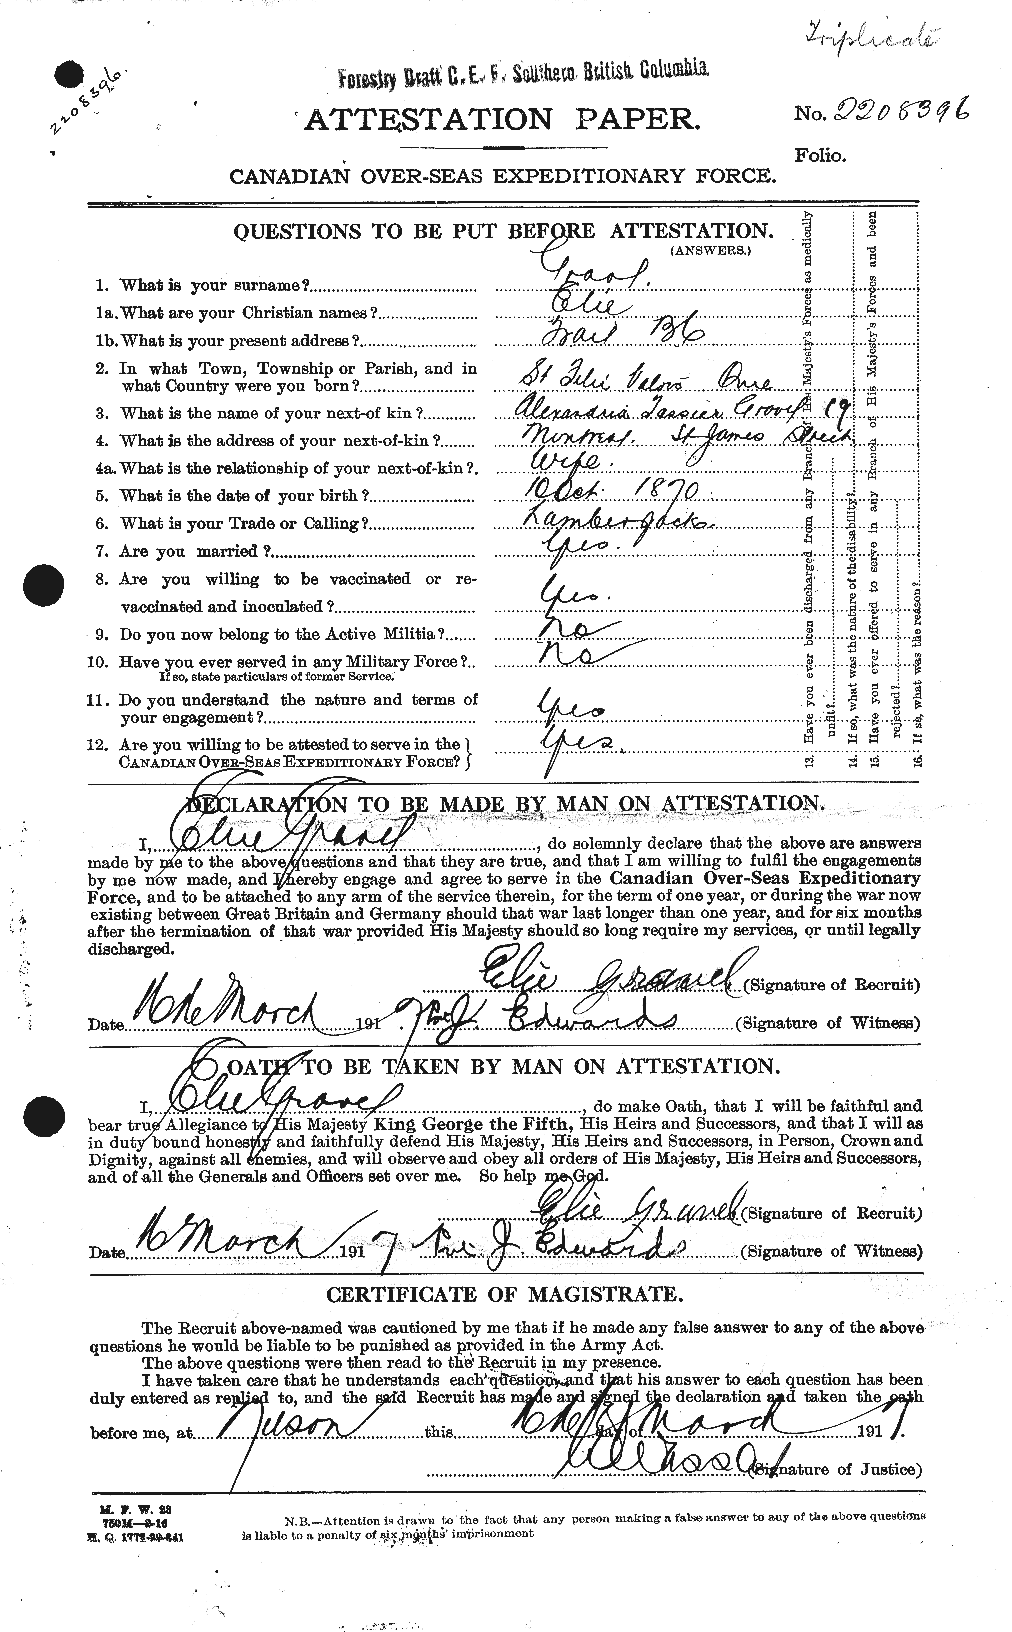 Personnel Records of the First World War - CEF 364616a